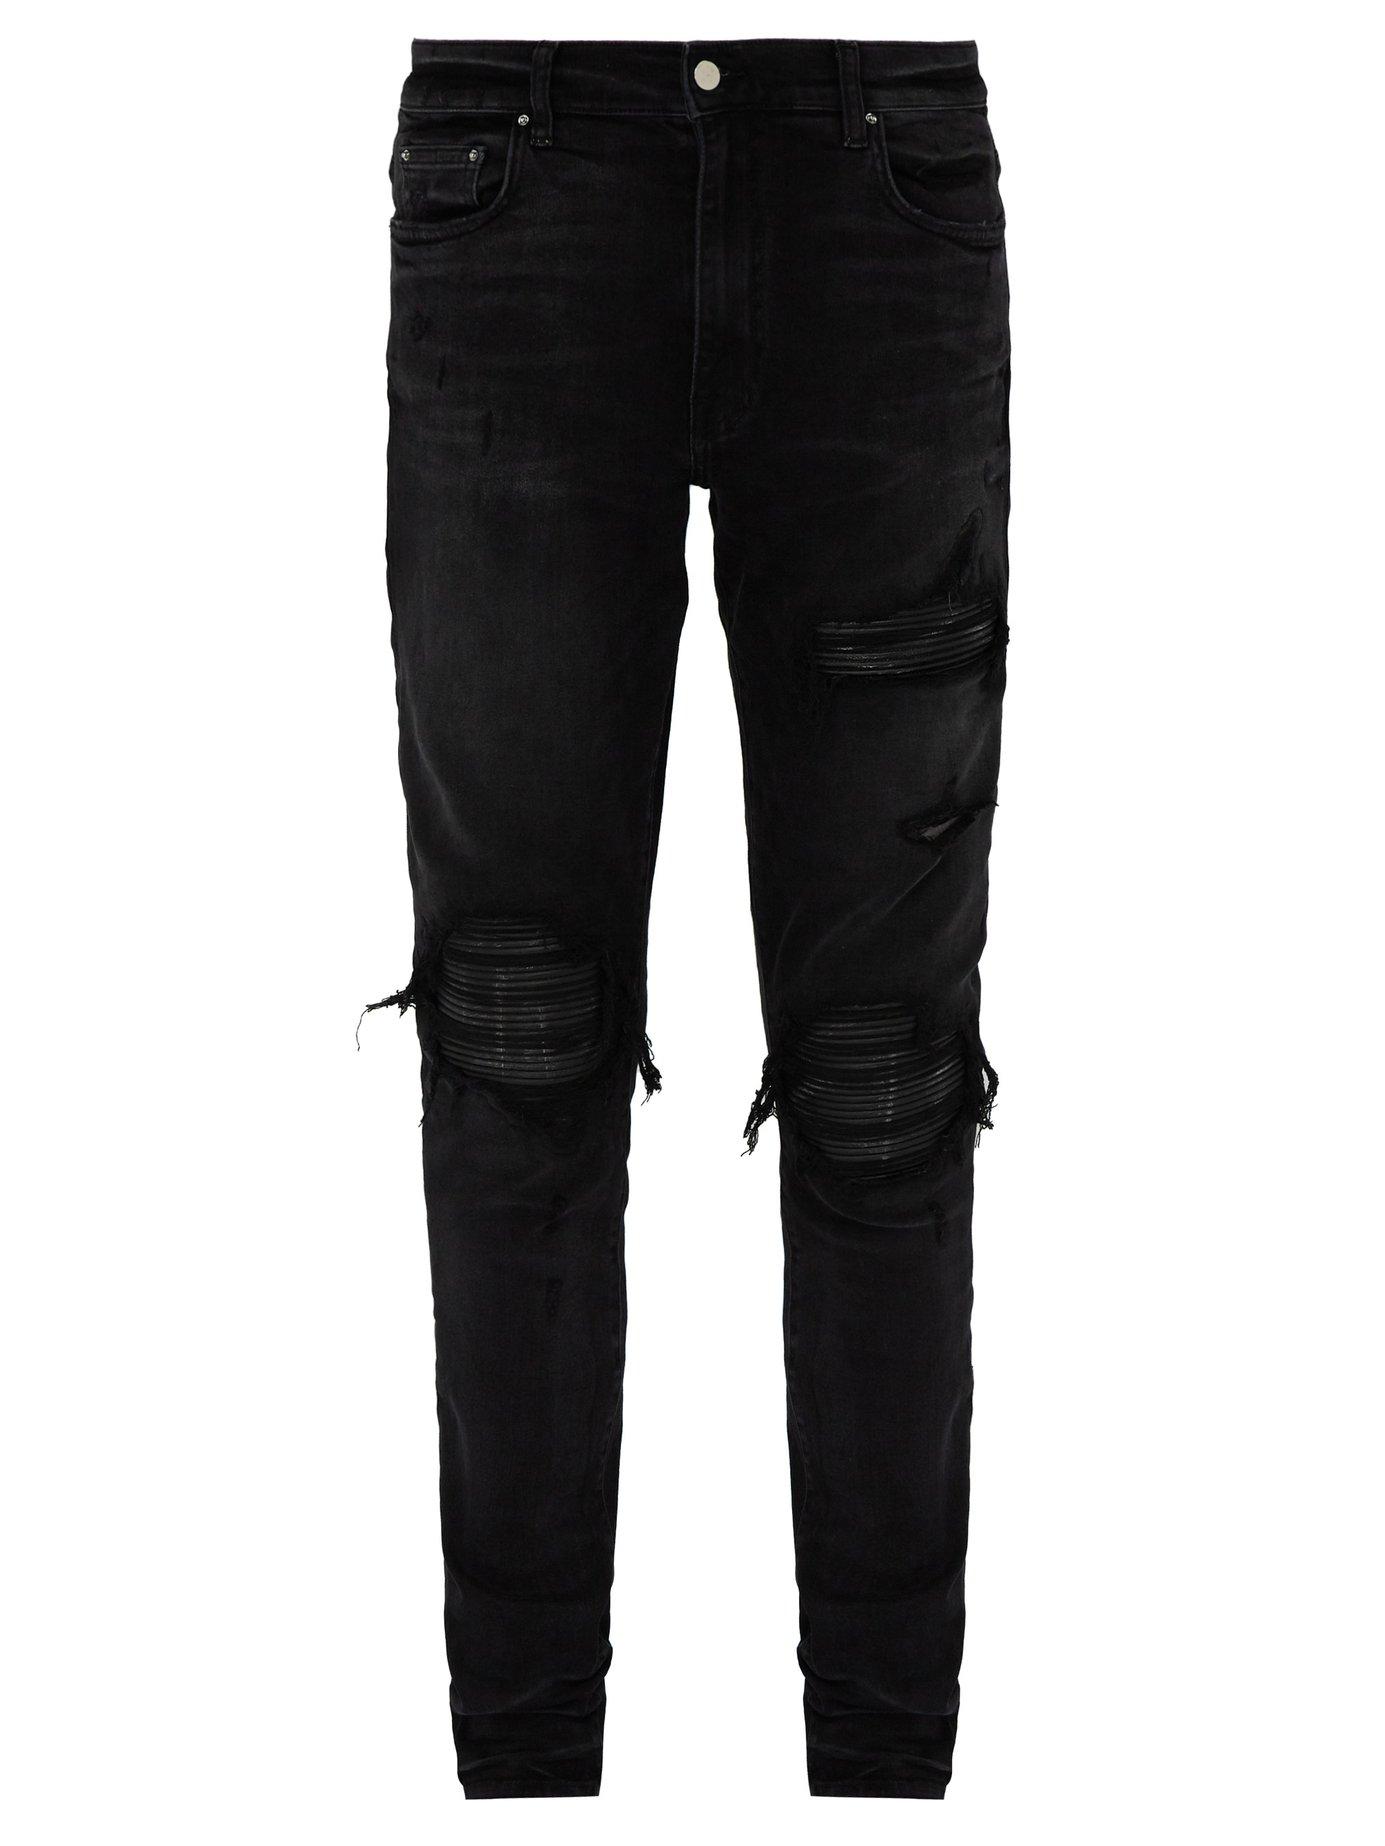 Lyst - Amiri Mx1 Leather Patch Slim Jeans in Black for Men